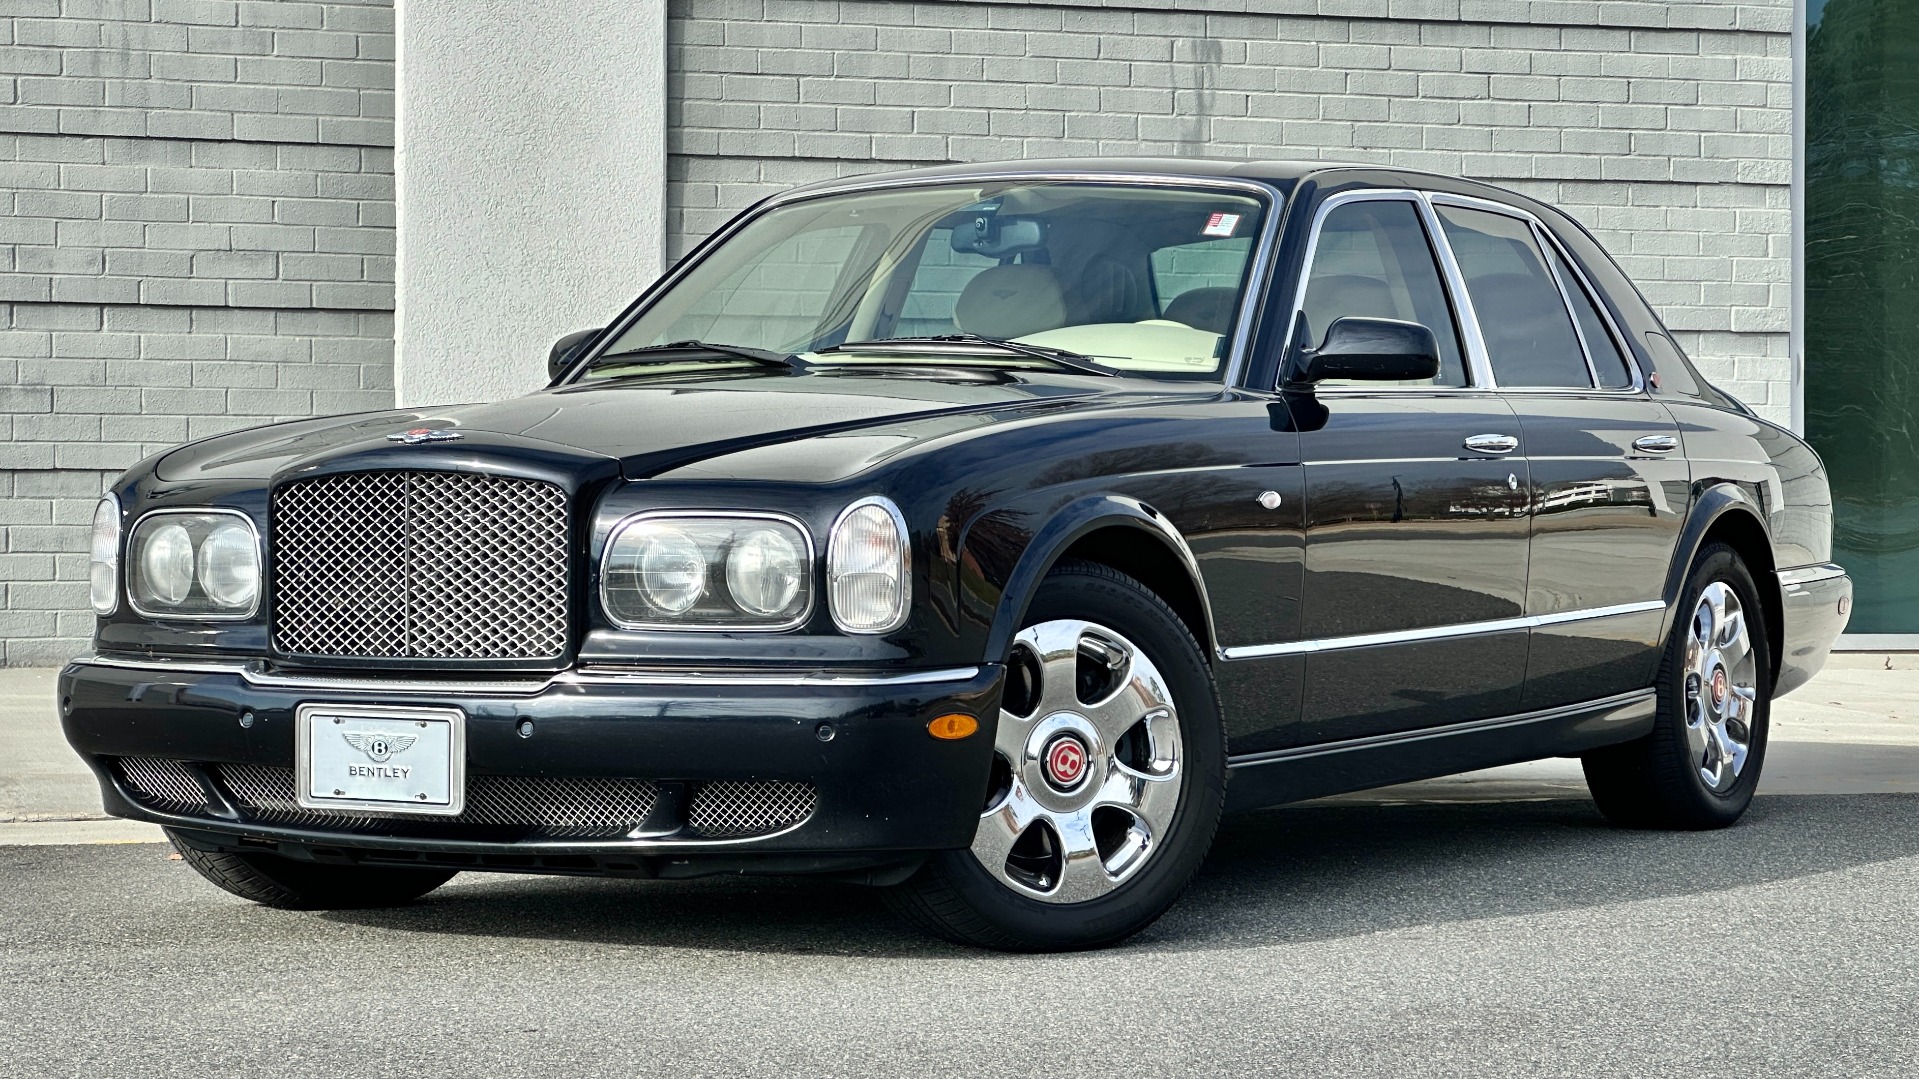 Used 2001 Bentley ARNAGE RED LABEL 6.75L V8 / TURBO / FULL LEATHER / WOOD TRIM / HEATED SEATS / SUNR for sale $26,999 at Formula Imports in Charlotte NC 28227 1